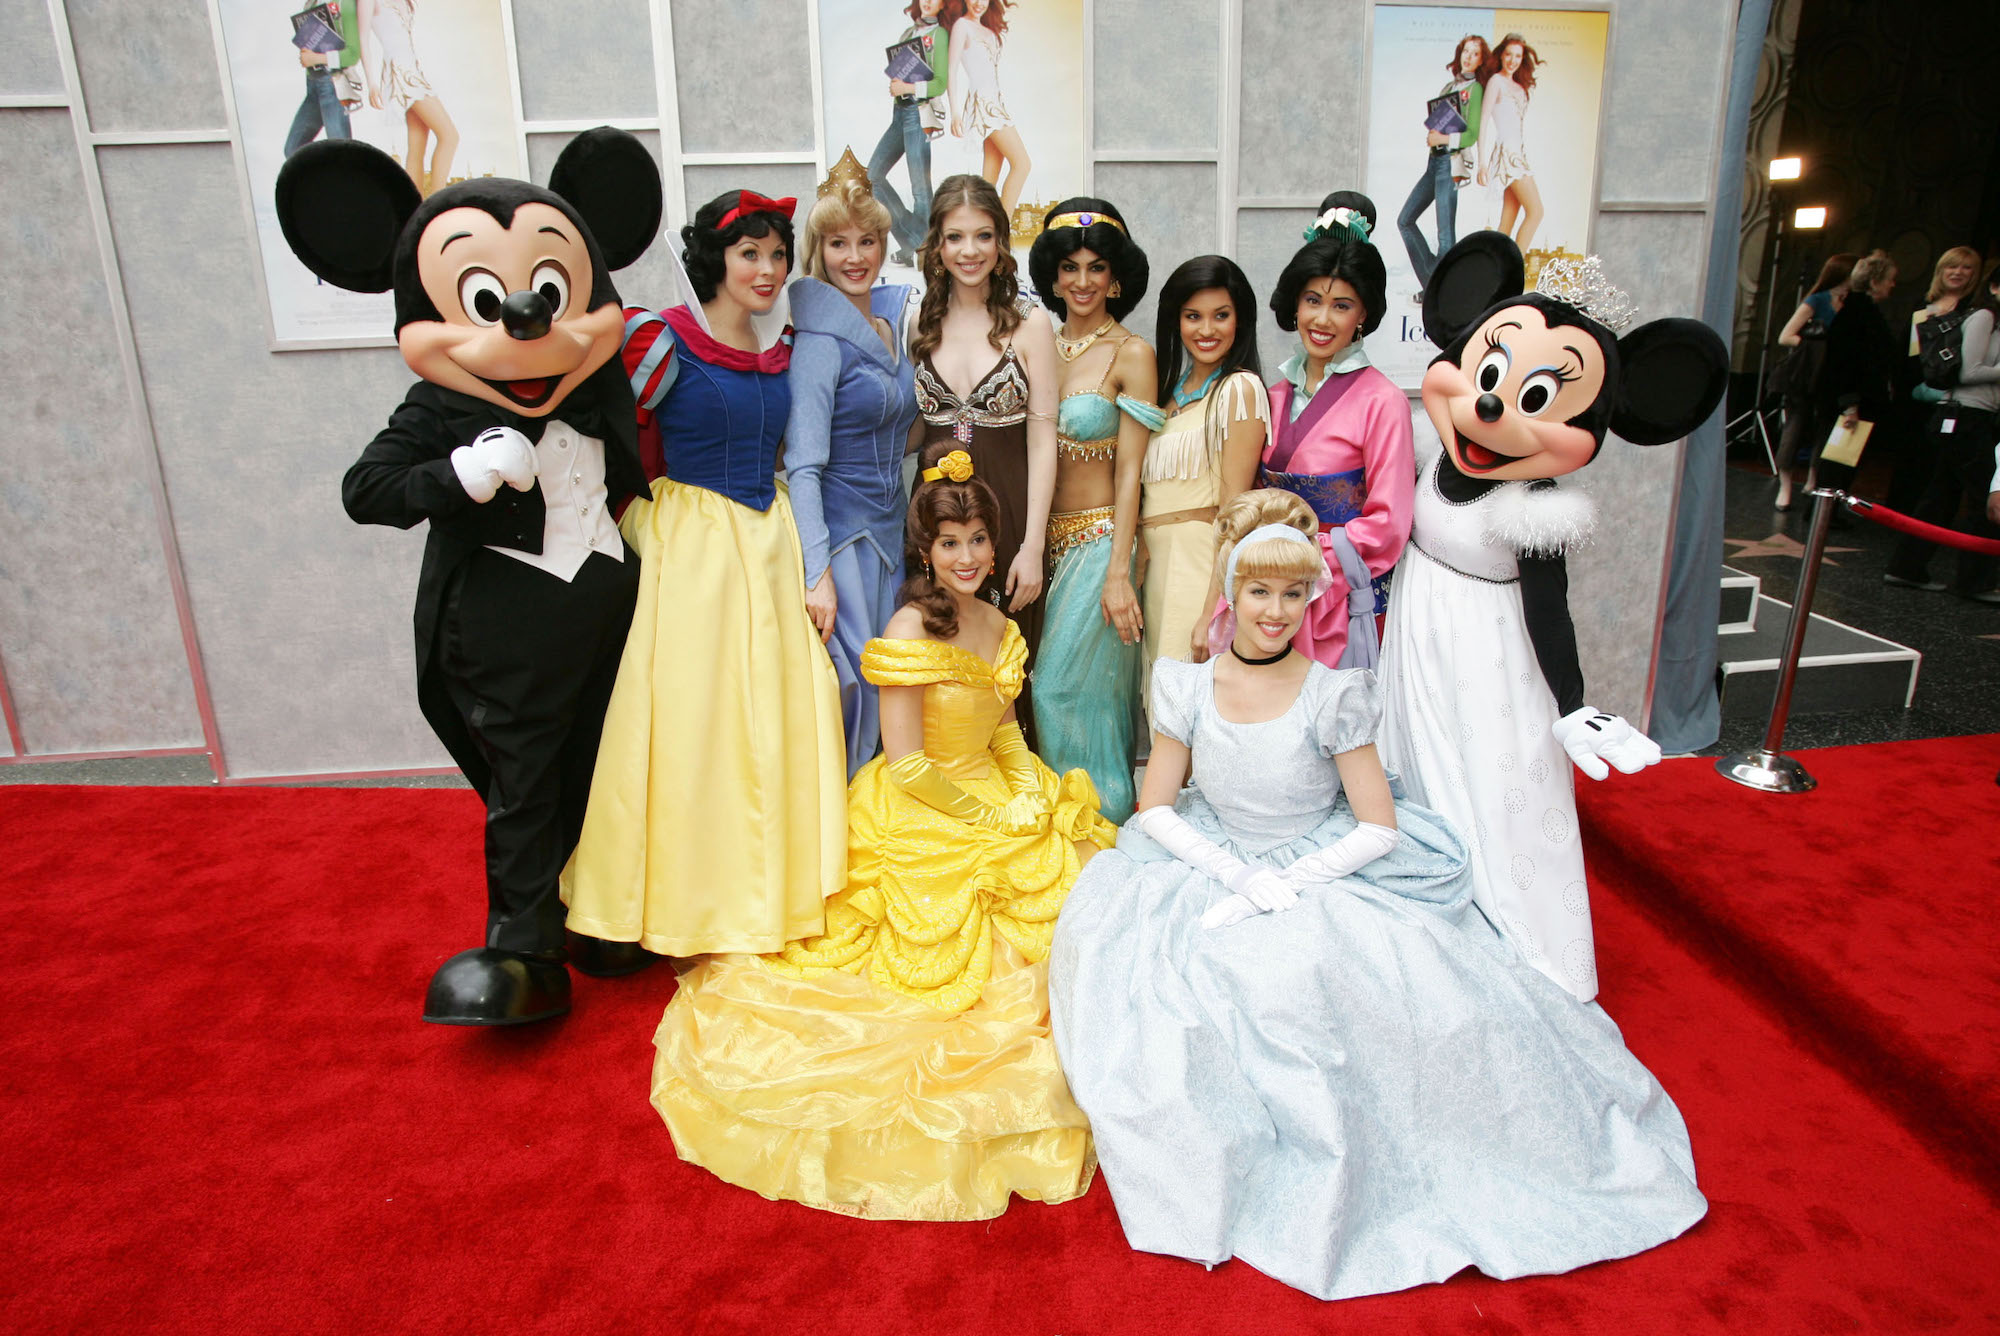 Michelle Trachtenberg poses with Disney princesses at the Walt Disney premiere of 'The Ice Princess' on March 13, 2005